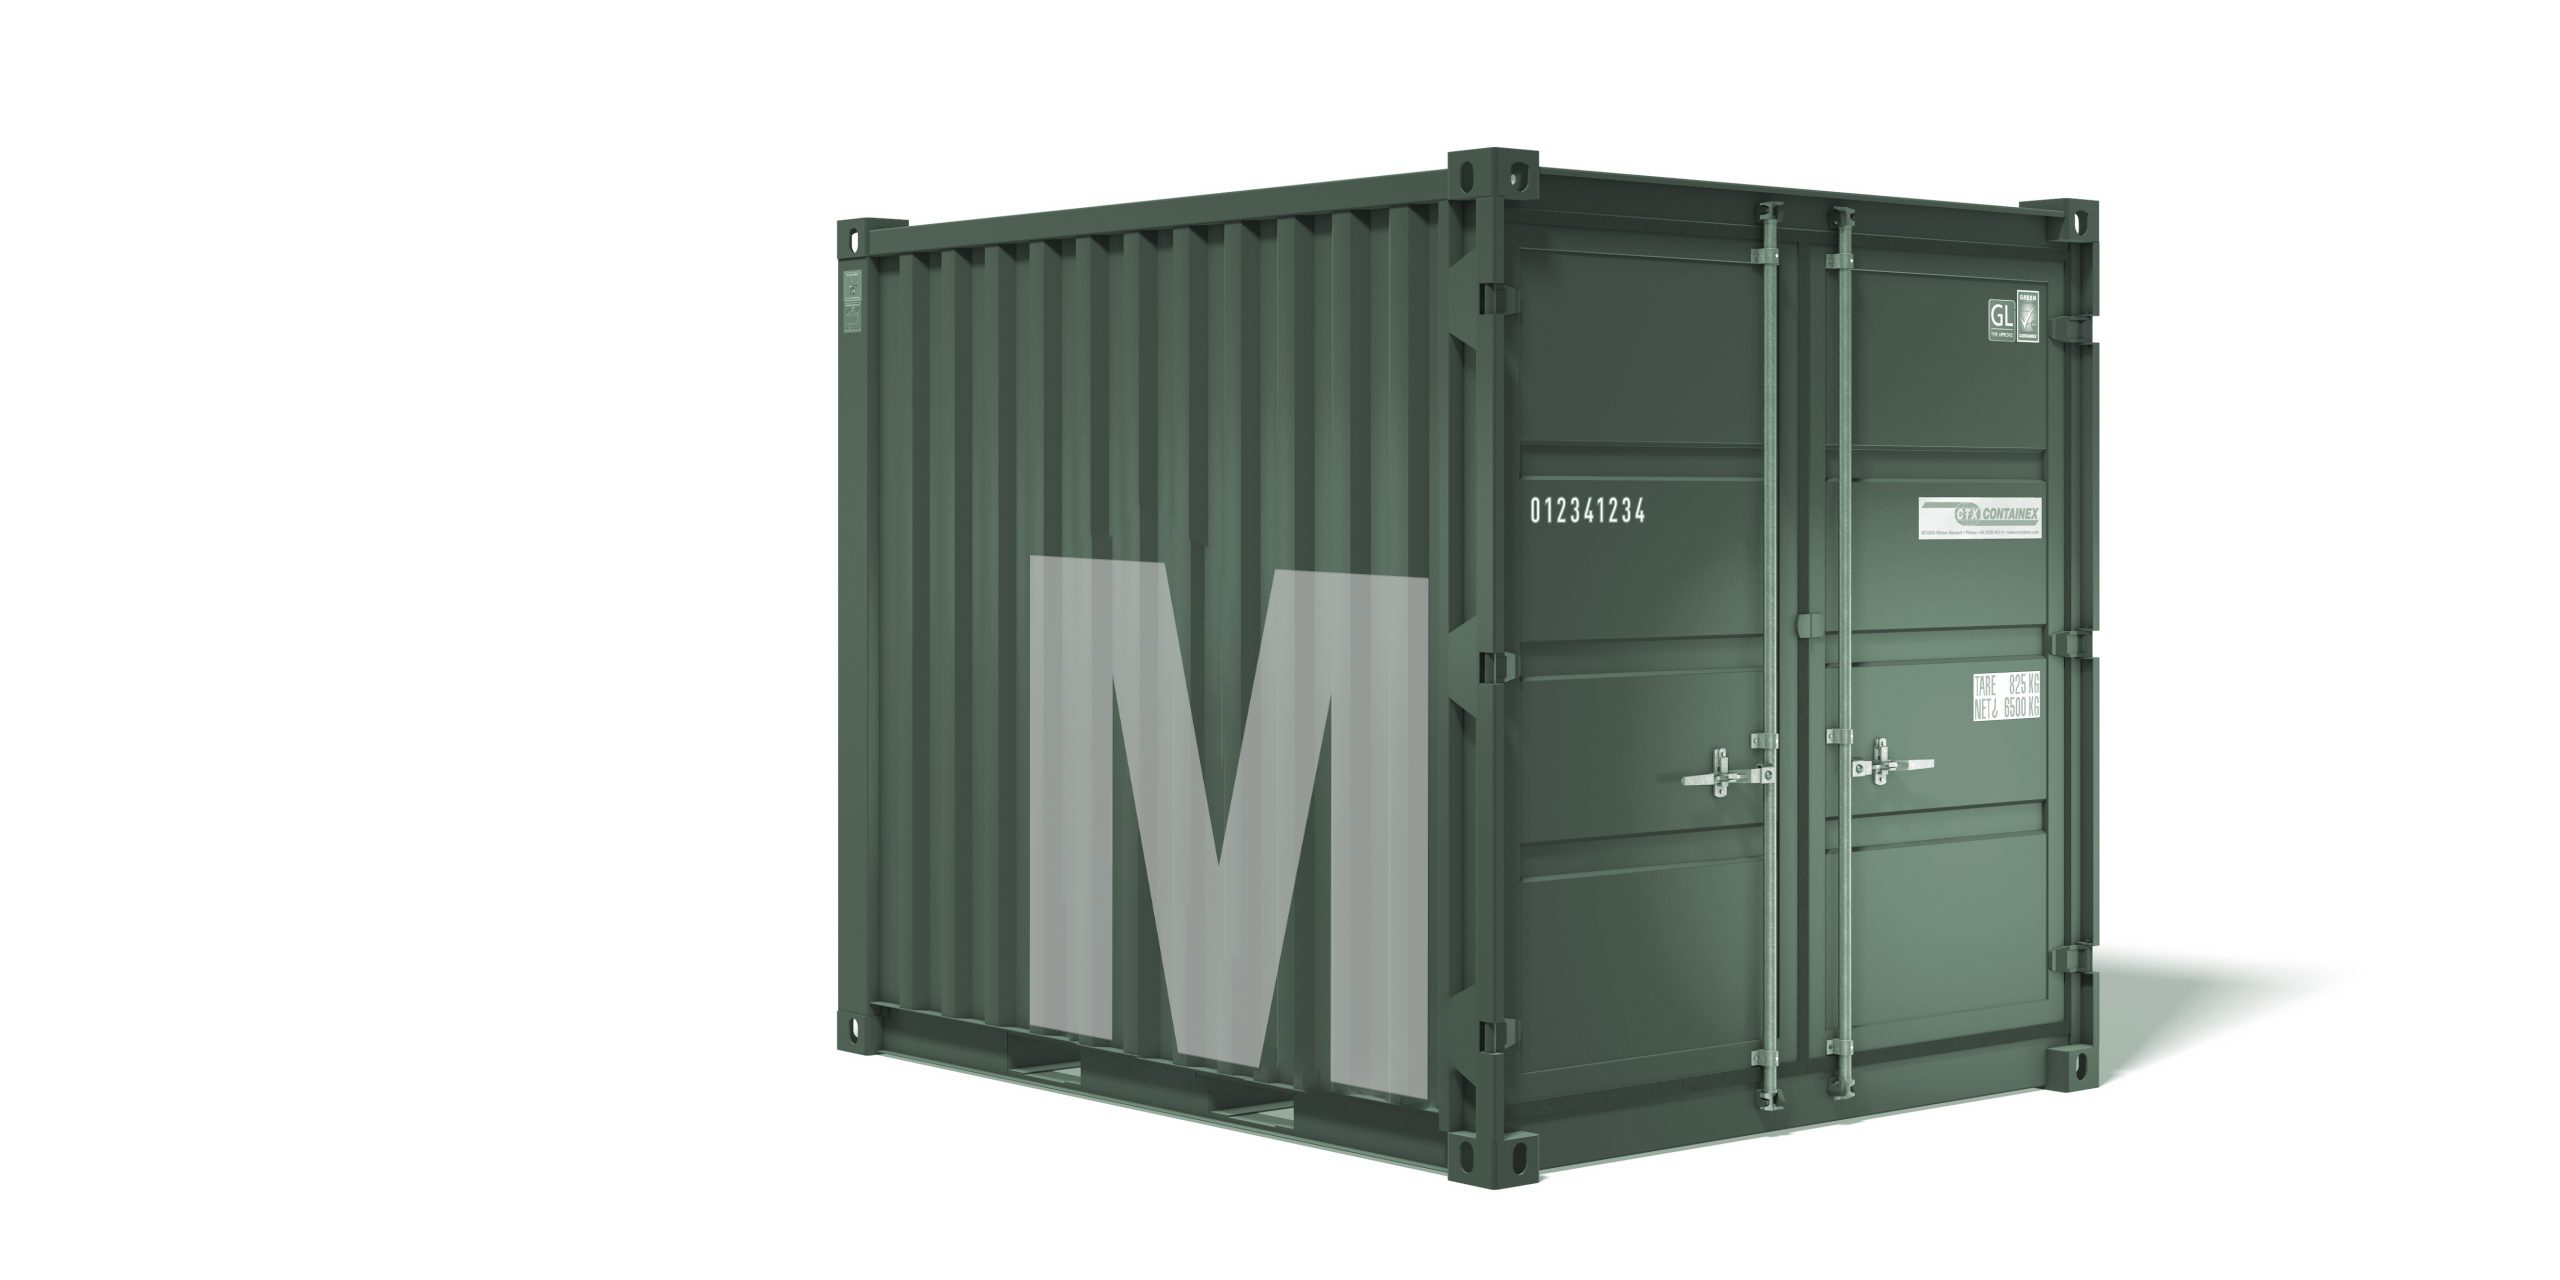 Lagercontainer M - Lagerfläche: 5,34 m2 / 12,08m3